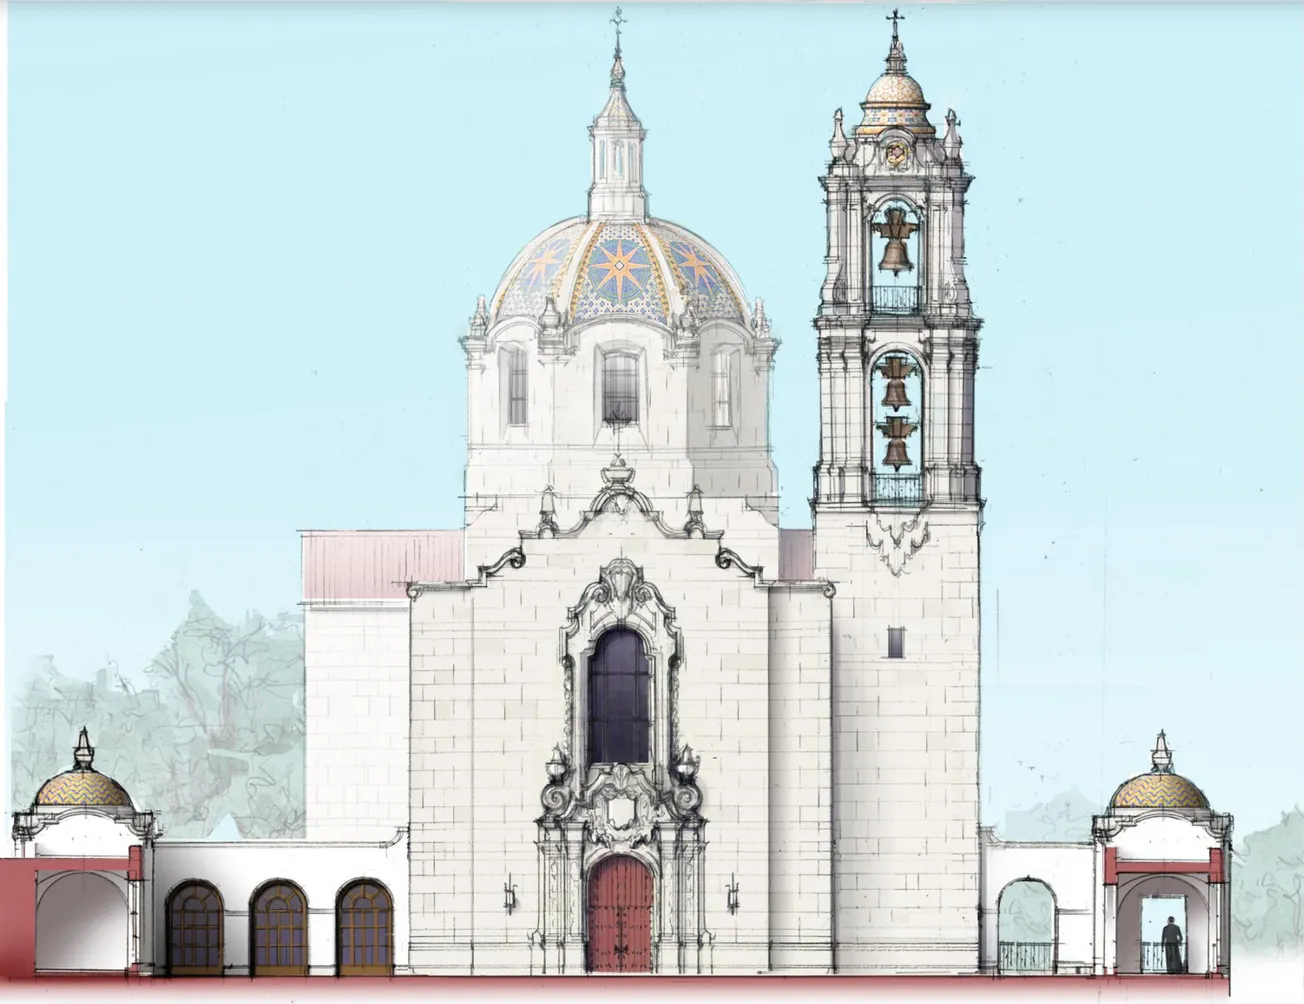 Designs revealed for La Florida Martyrs shrine in Tallahassee